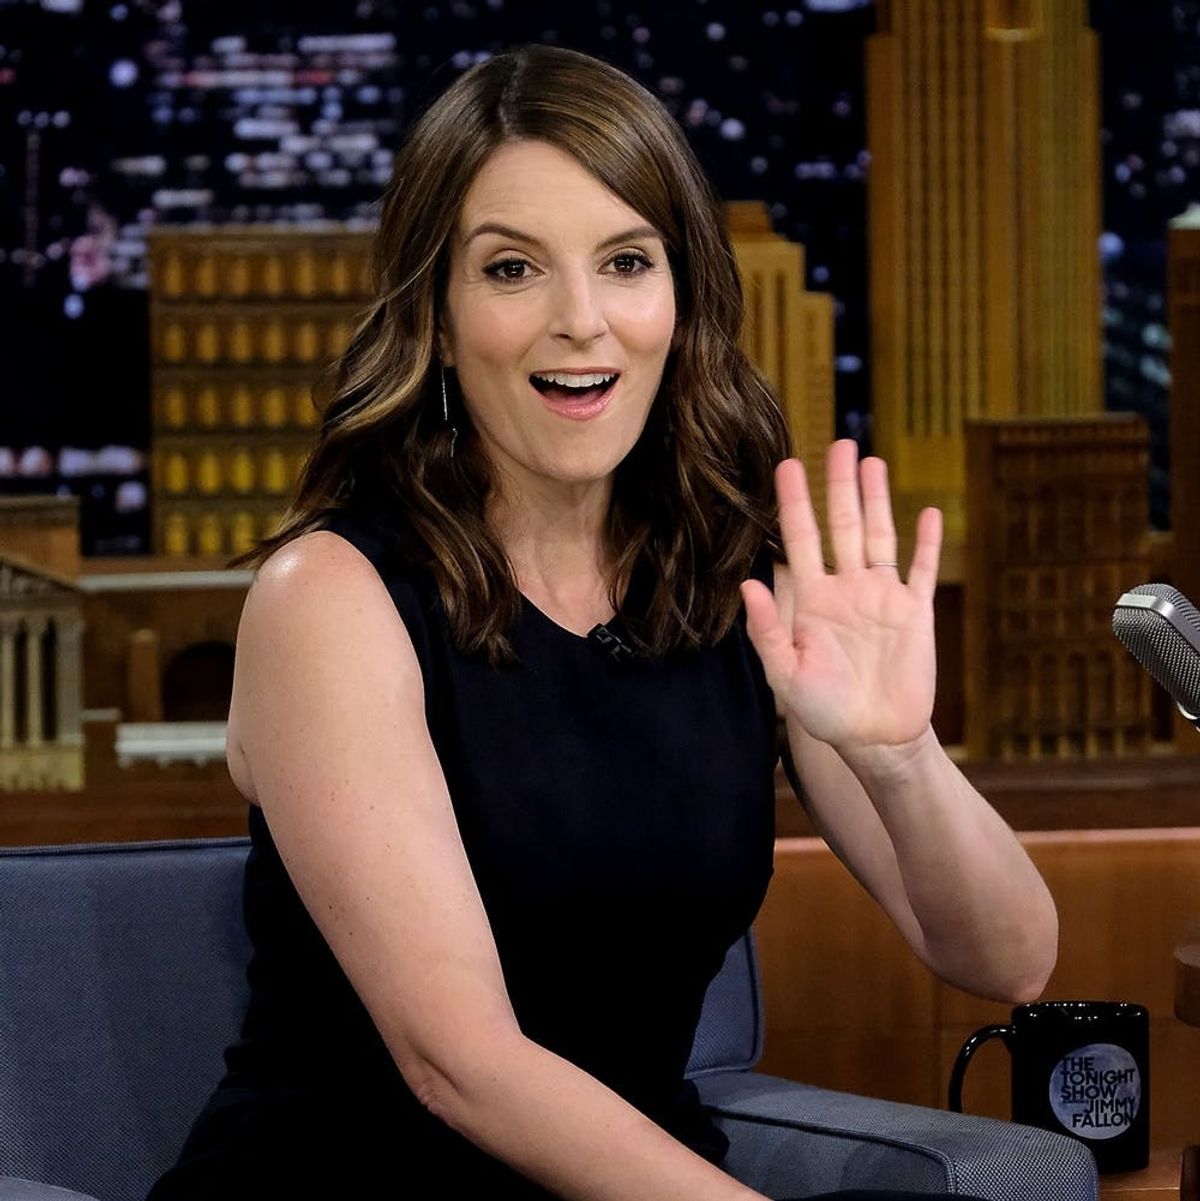 Why Tina Fey’s Sheet-Caking Routine Is Making a Lot of People Really Upset